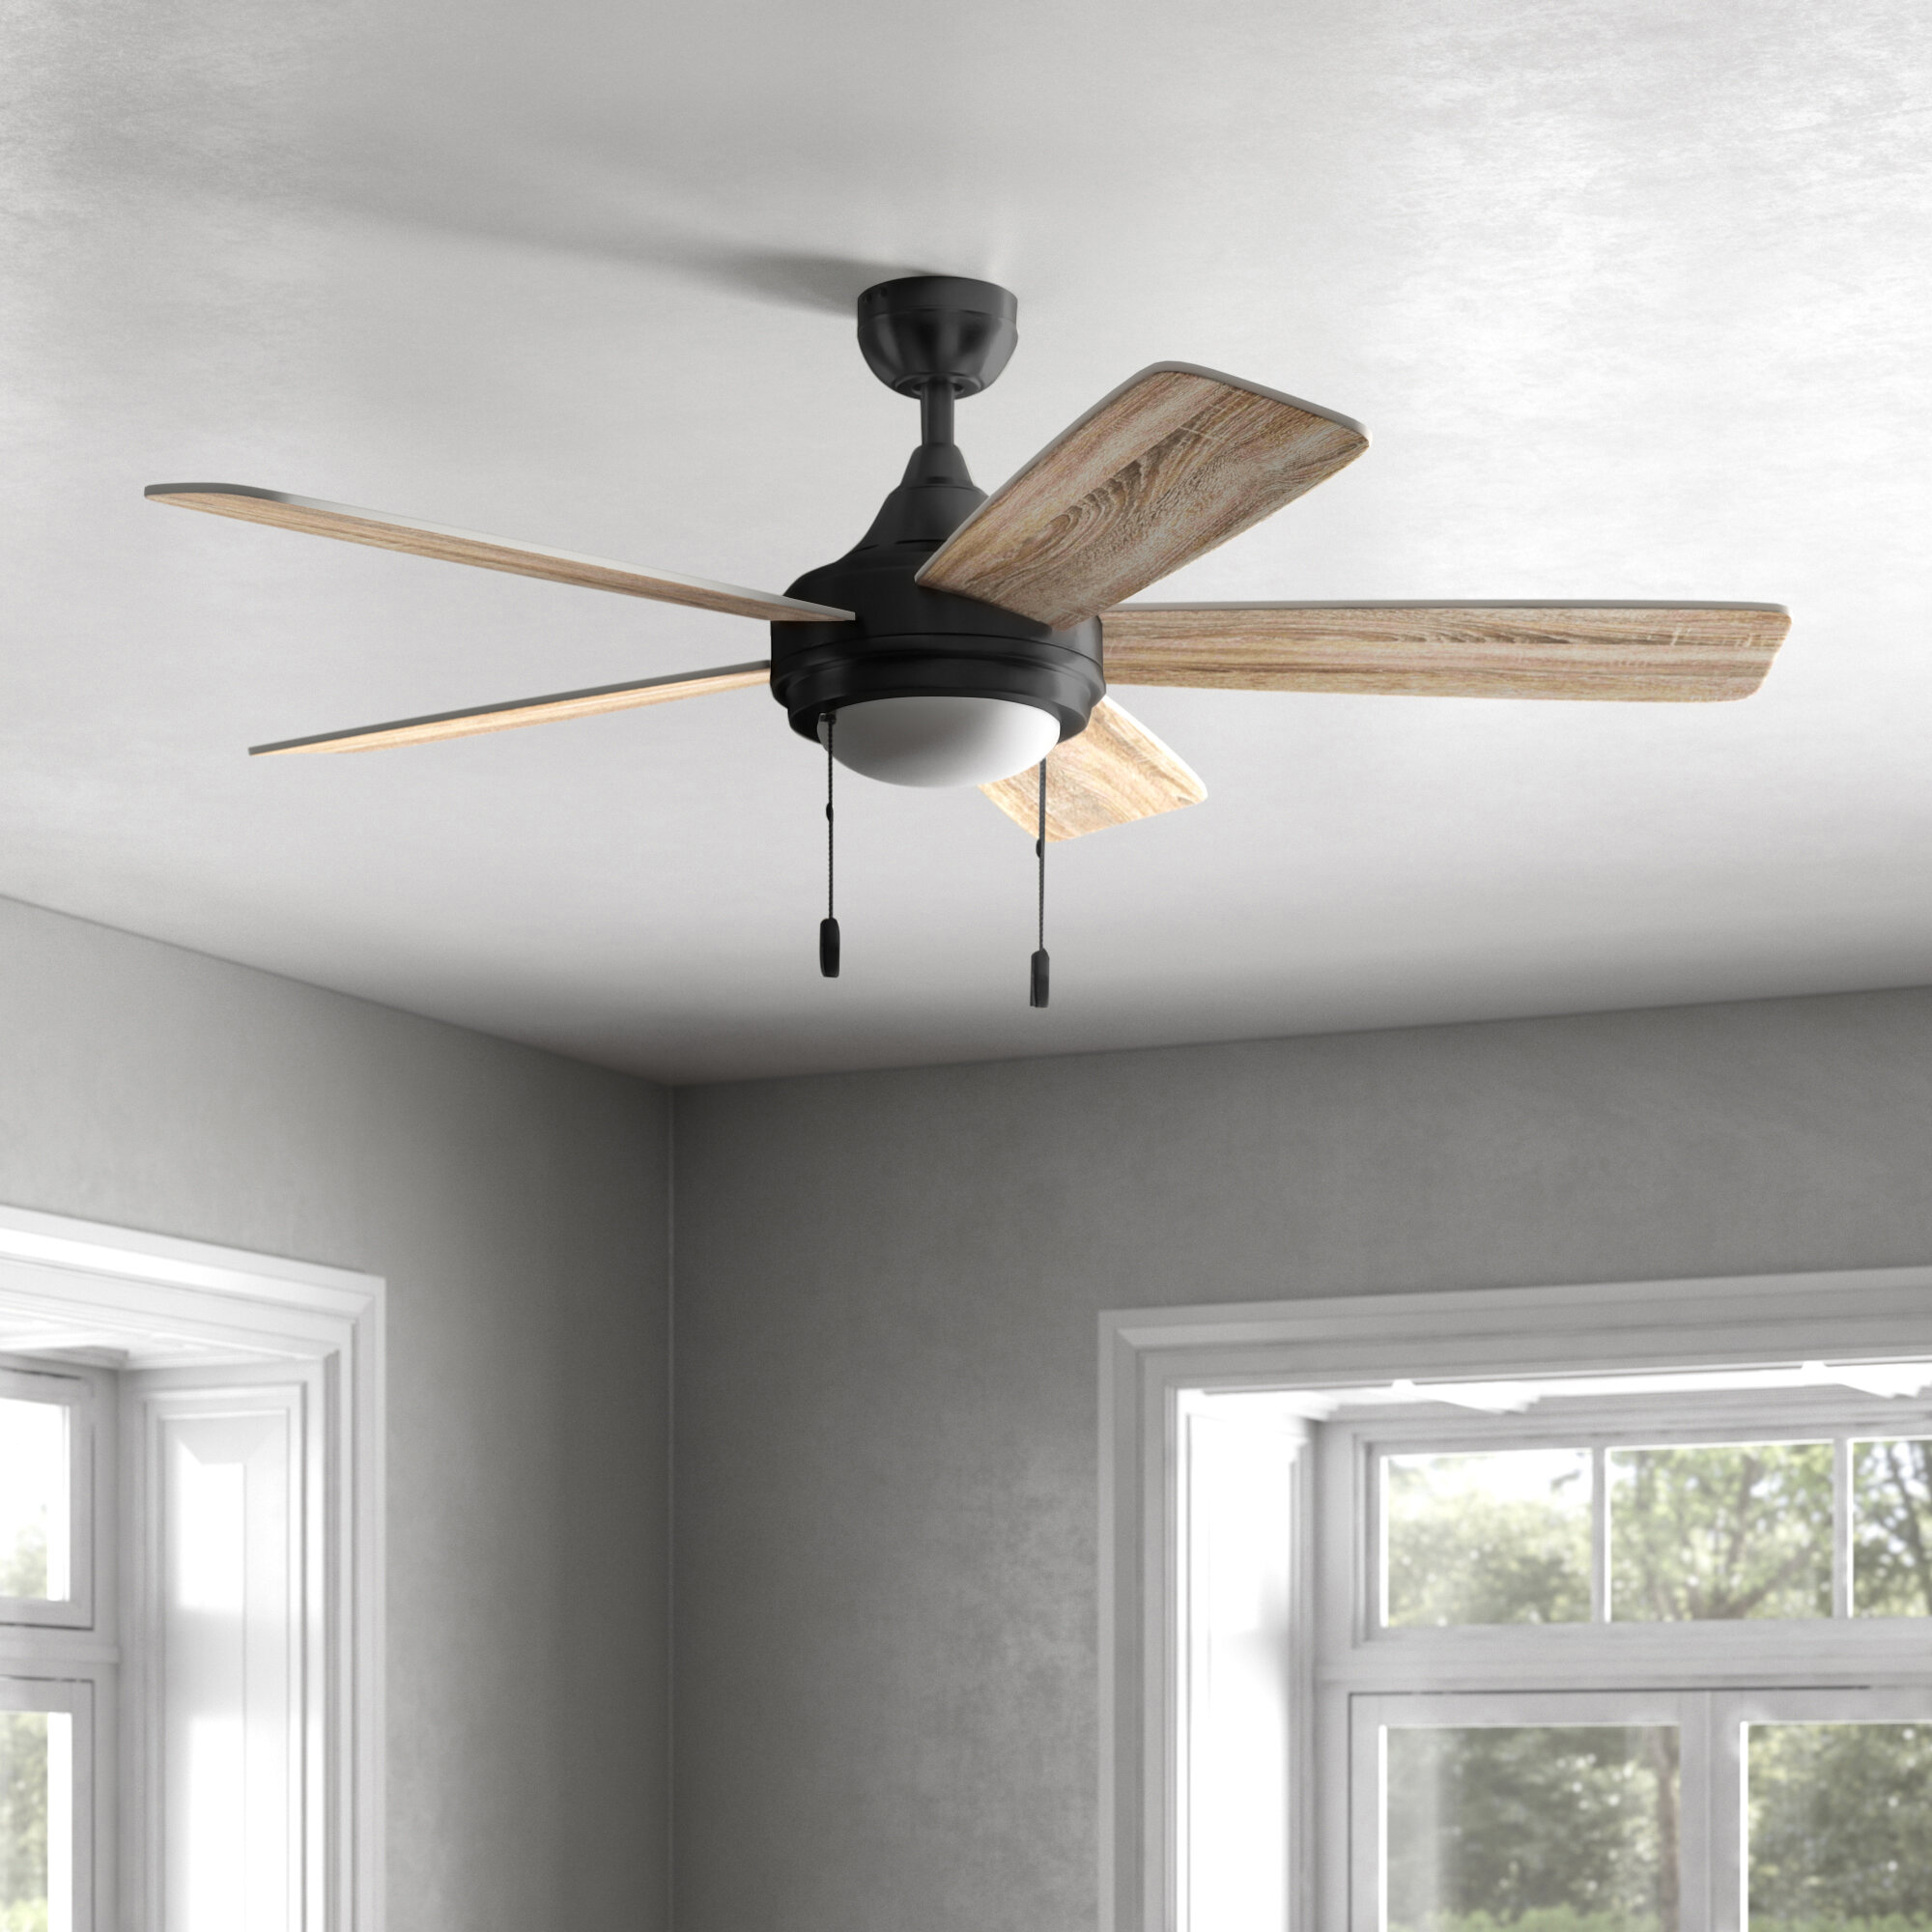 Breakwater Bay Pippin Led Standard Ceiling Fan With Pull Chain And Light Kit Included Reviews Wayfair